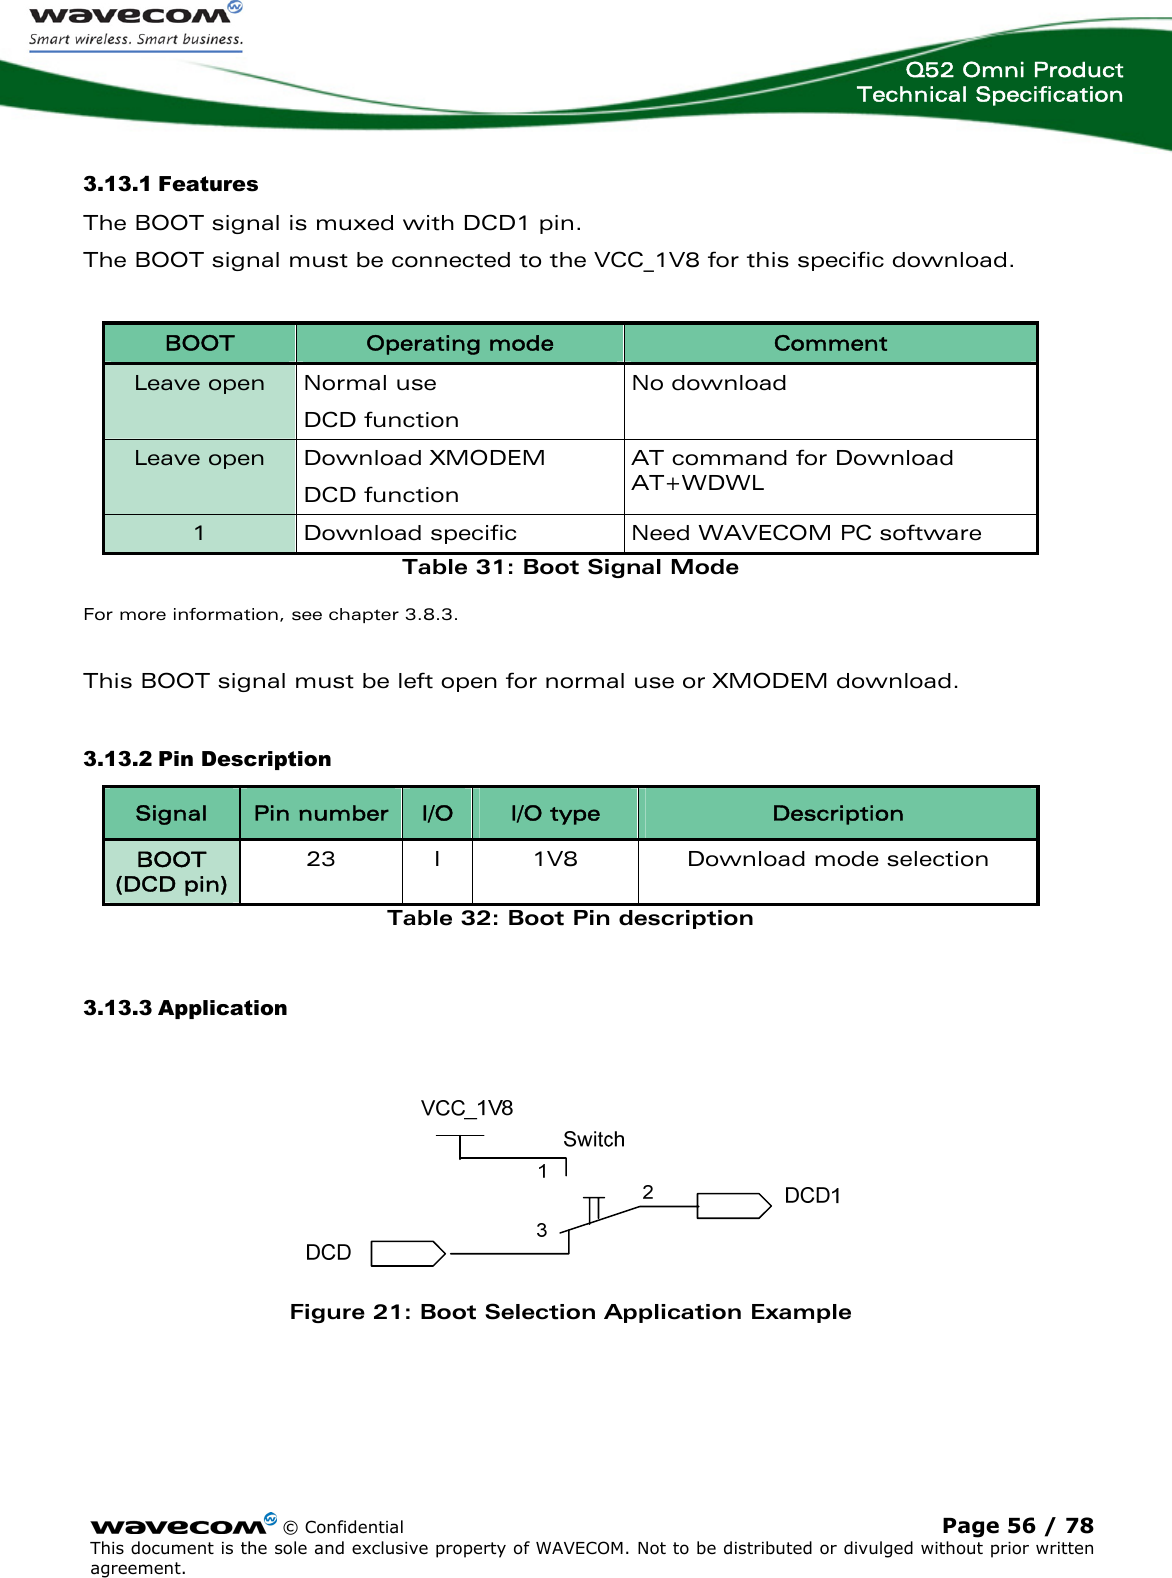  Q52 Omni Product Technical Specification    © Confidential Page 56 / 78 This document is the sole and exclusive property of WAVECOM. Not to be distributed or divulged without prior written agreement.  3.13.1 Features The BOOT signal is muxed with DCD1 pin. The BOOT signal must be connected to the VCC_1V8 for this specific download.  BOOT  Operating mode  Comment Leave open  Normal use DCD function No download Leave open  Download XMODEM DCD function AT command for Download AT+WDWL 1  Download specific  Need WAVECOM PC software Table 31: Boot Signal Mode For more information, see chapter 3.8.3.  This BOOT signal must be left open for normal use or XMODEM download. 3.13.2 Pin Description Signal  Pin number  I/O  I/O type  Description BOOT (DCD pin) 23 I 1V8  Download mode selection Table 32: Boot Pin description 3.13.3 Application   Figure 21: Boot Selection Application Example 